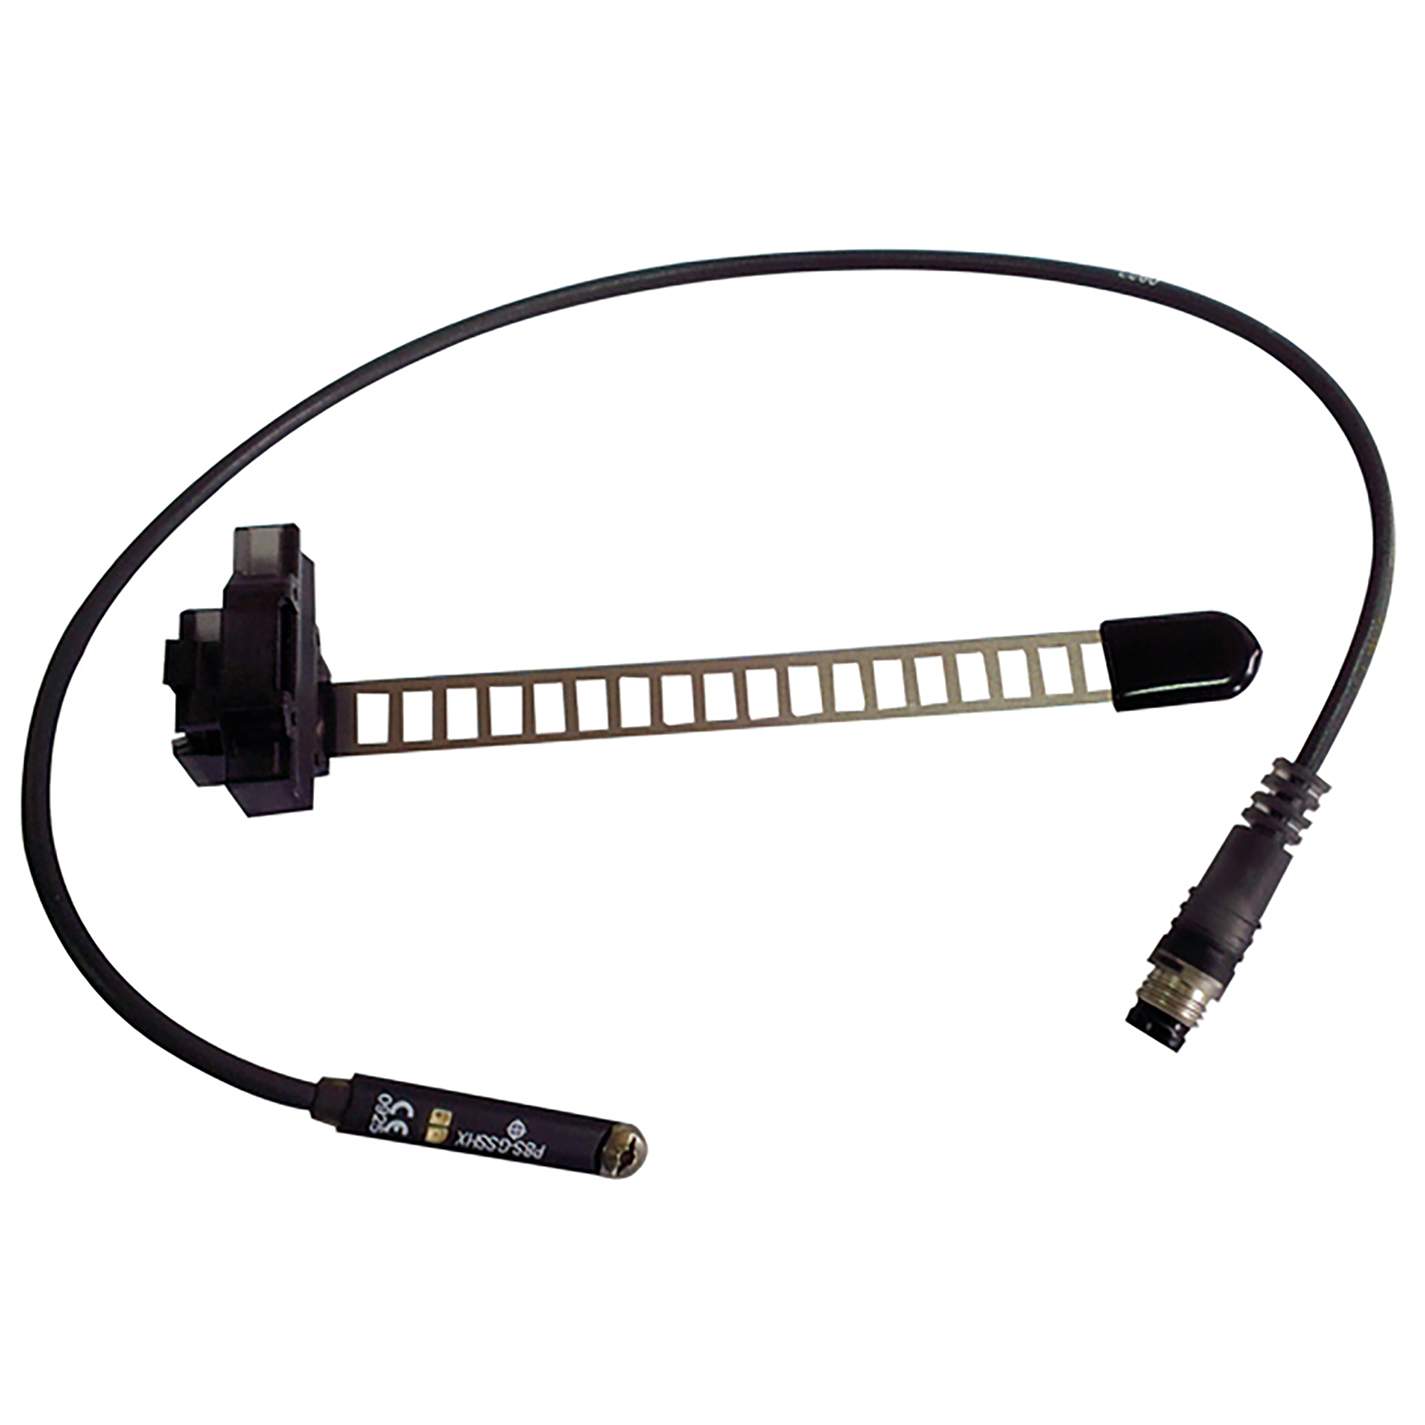 Cable 3 Meter Flex PVC with 8mm Round Connector